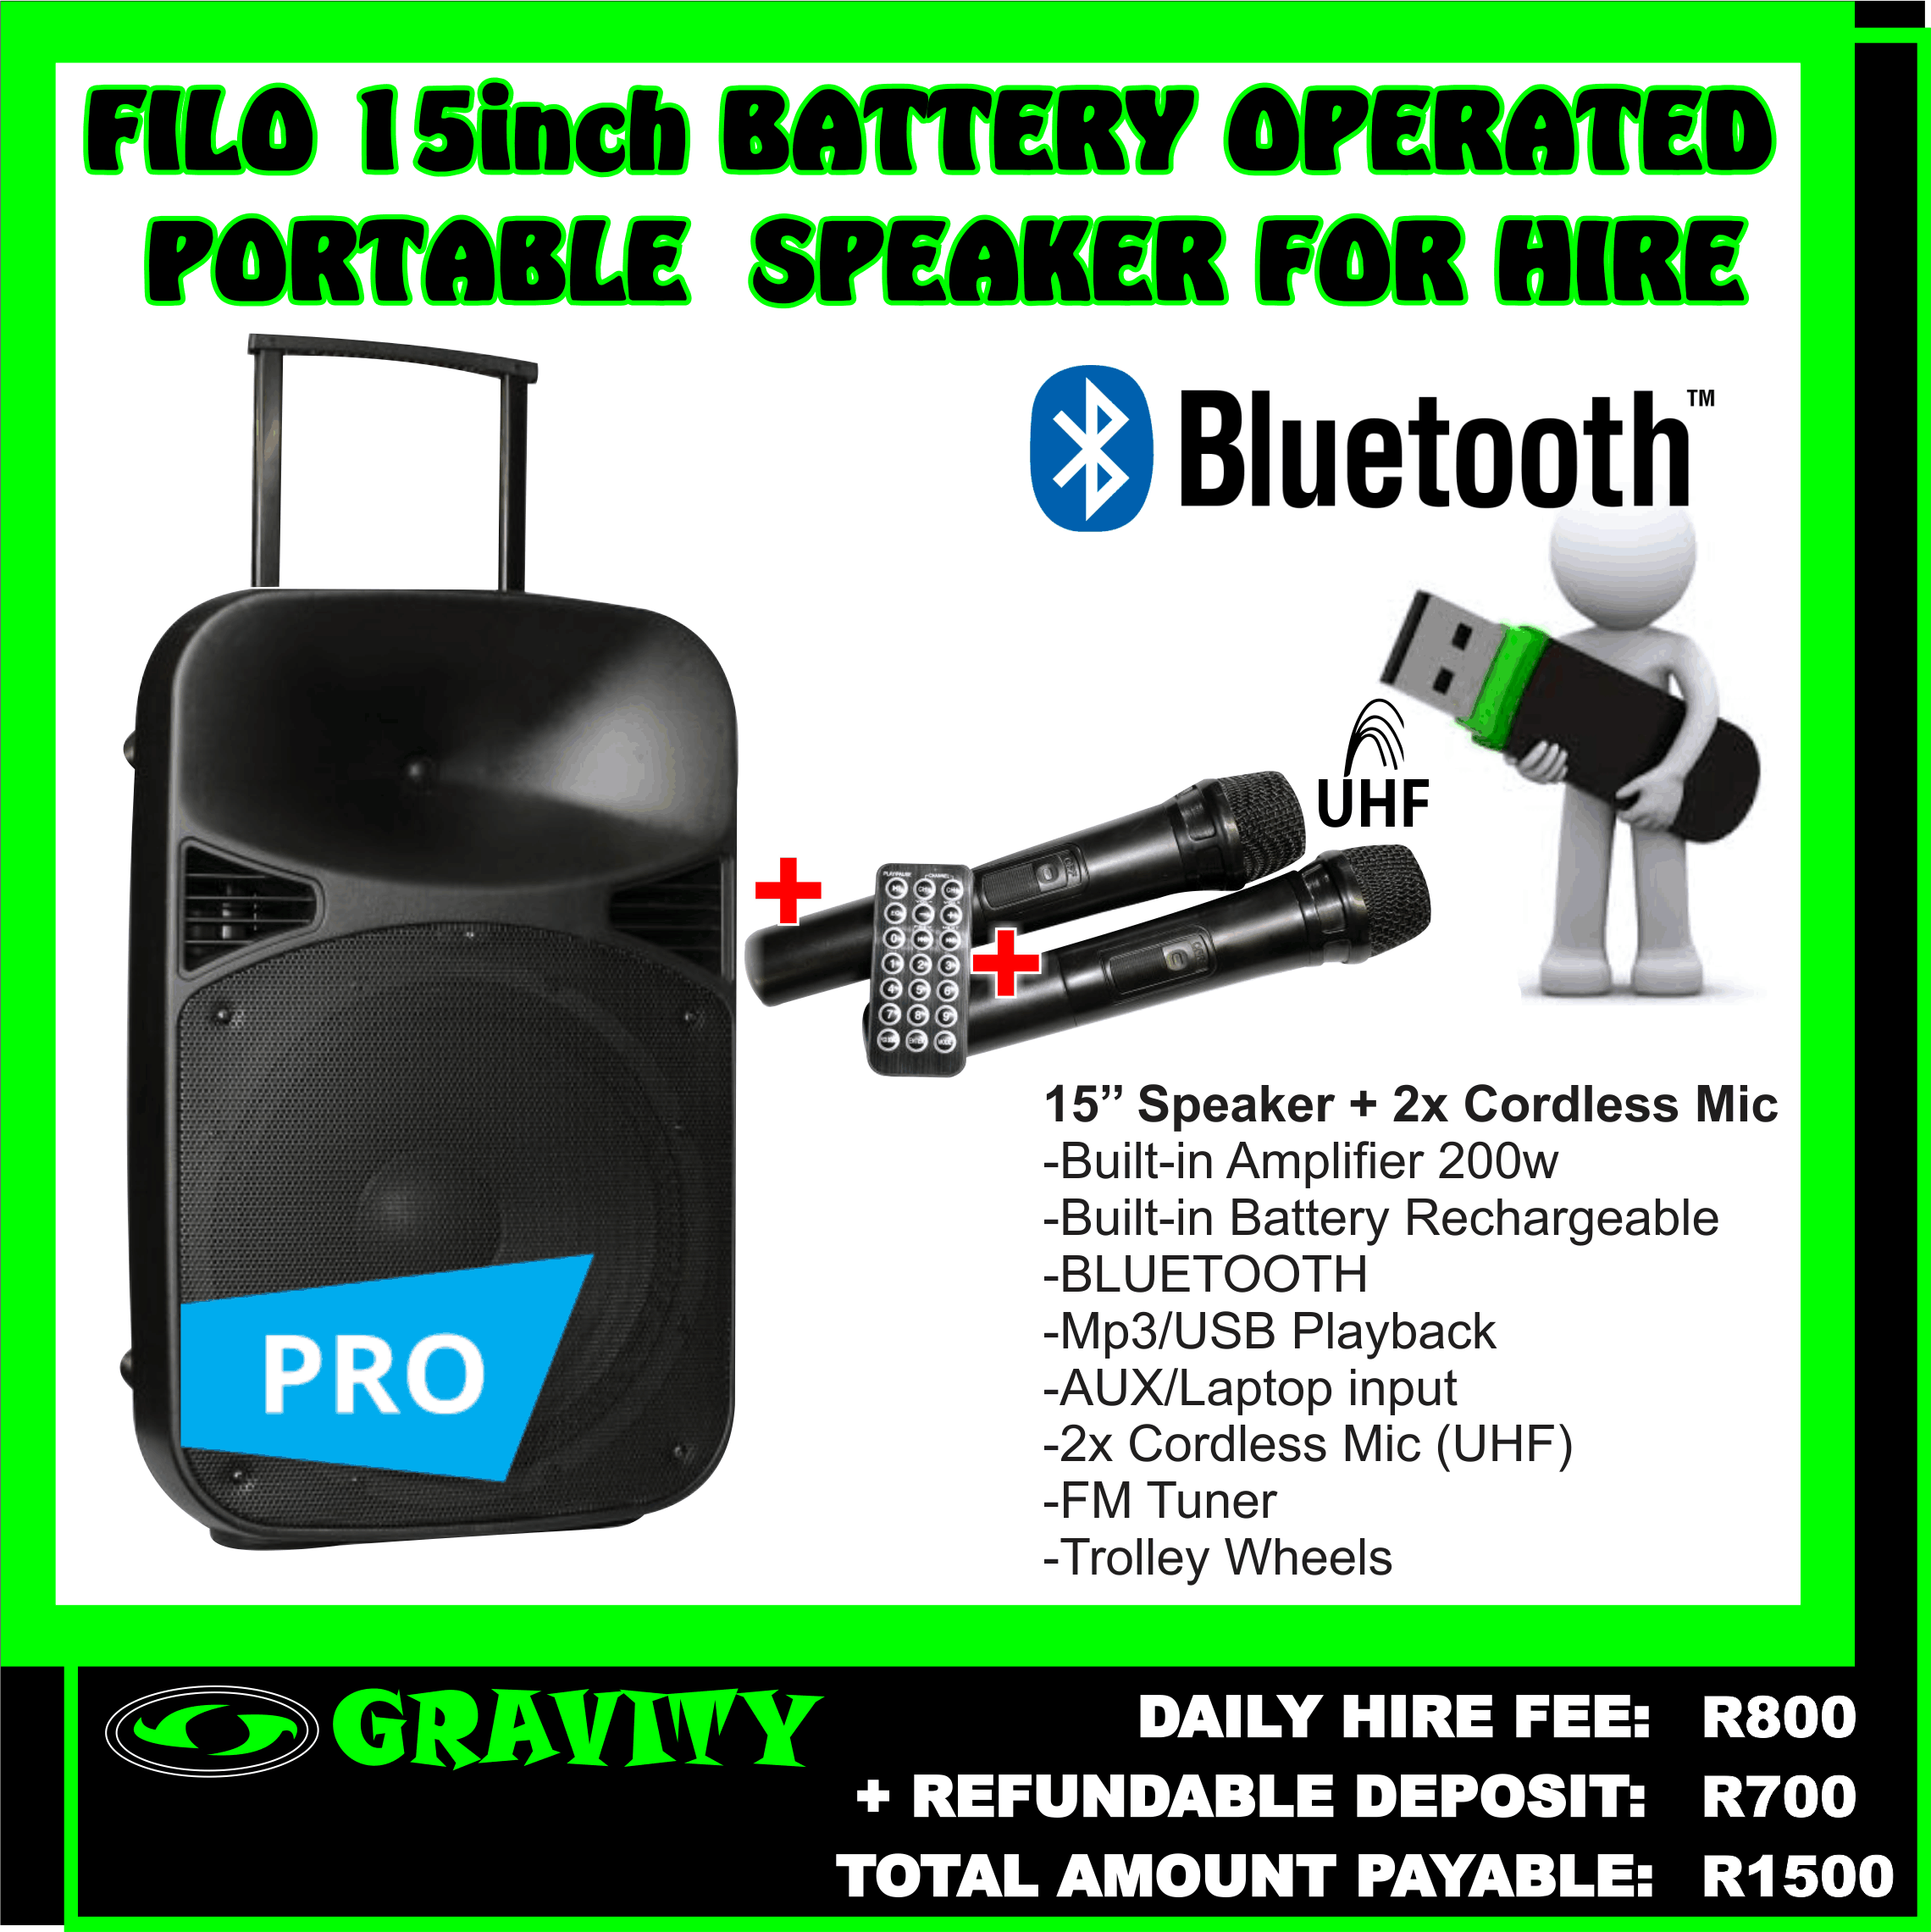 15inch battery operated portable active speaker for hire durban . load shedding speaker